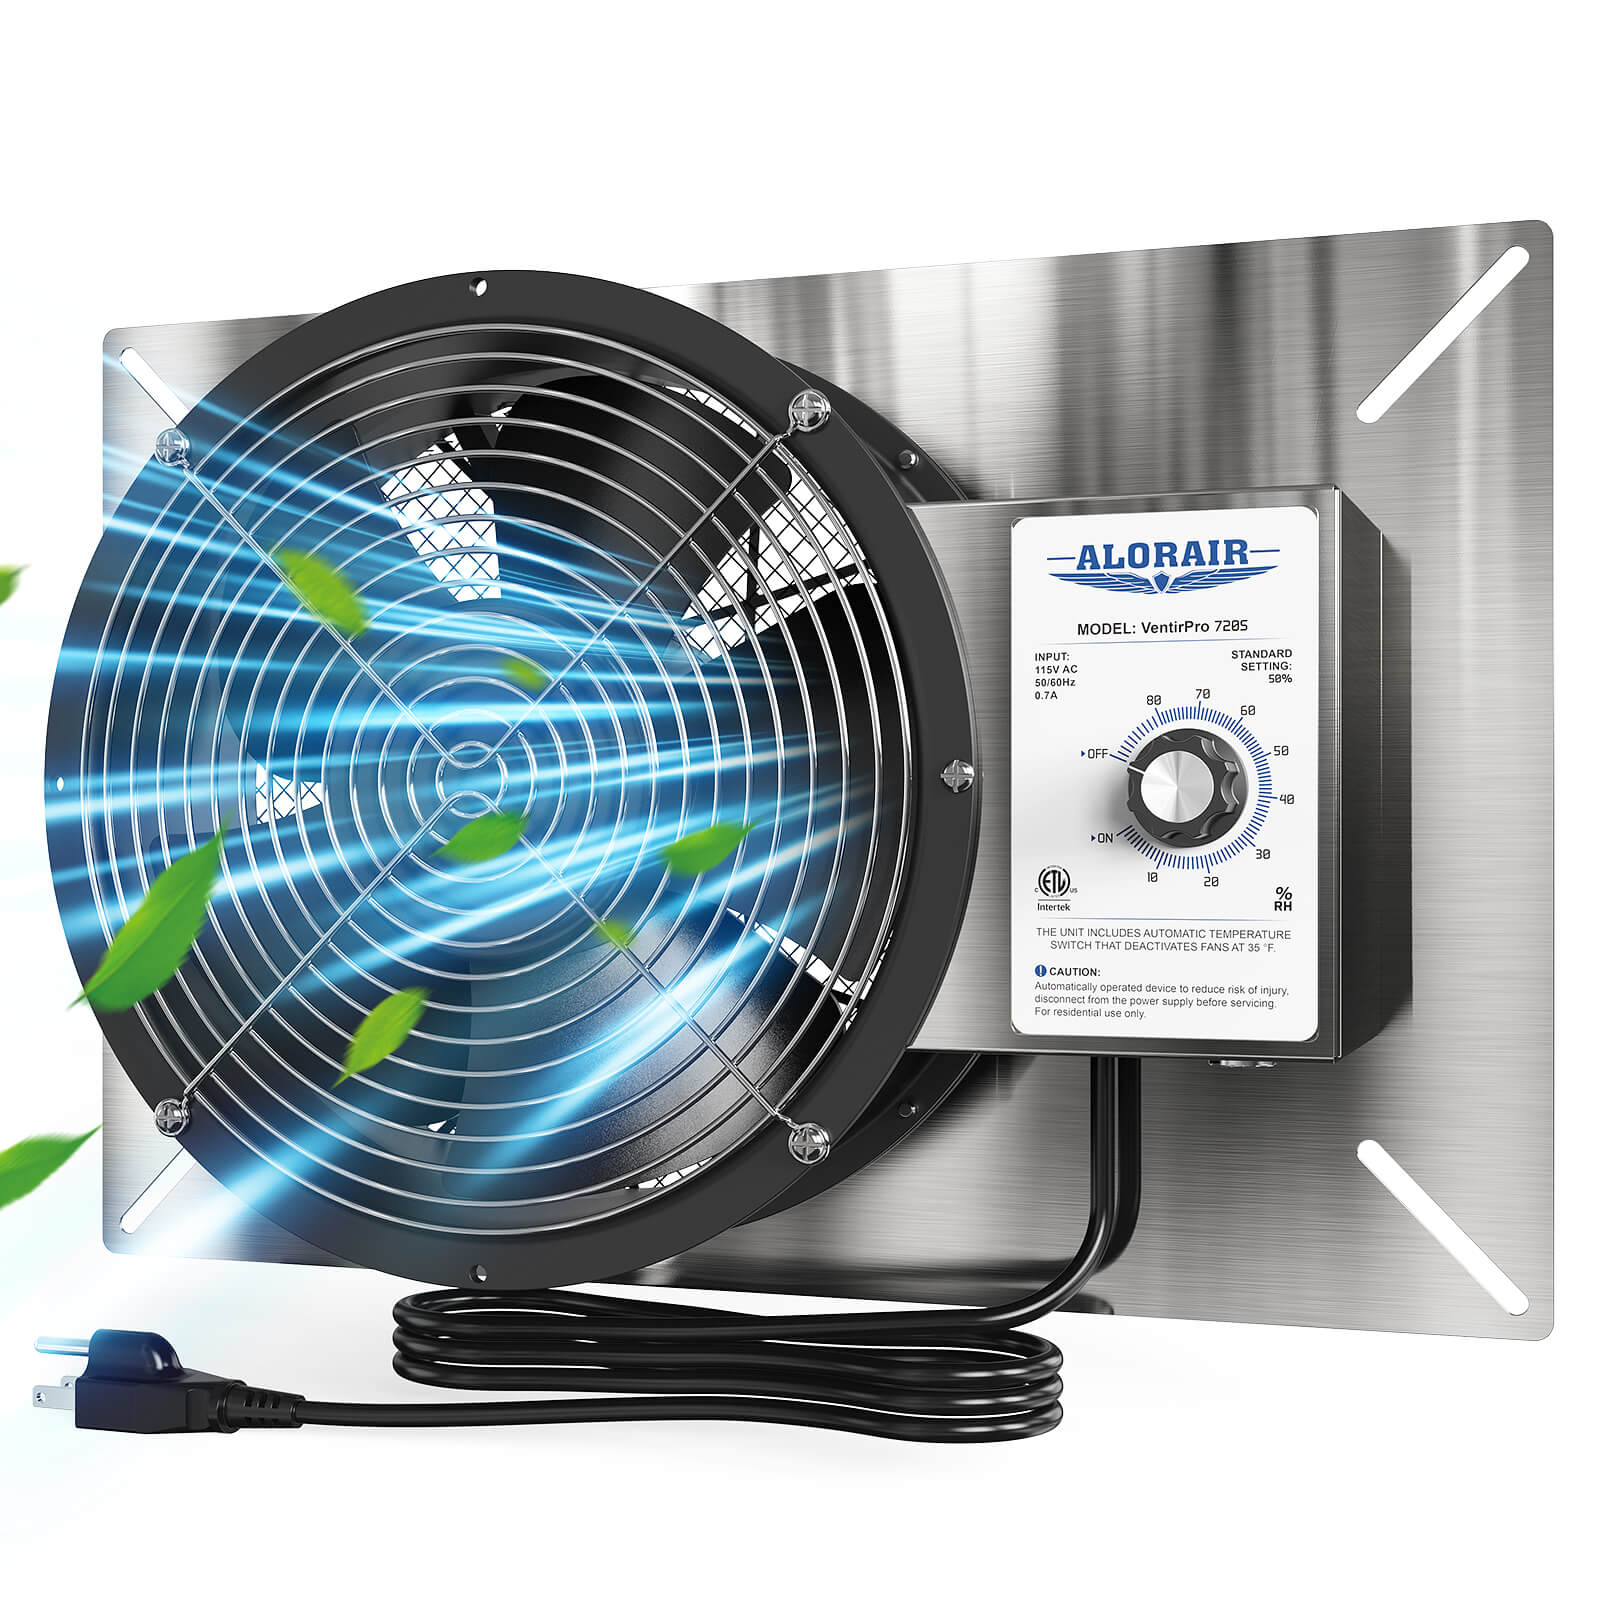 AlorAir Stainless Steel Crawl Space Ventilator Fan - 720 CFM Air Out Vent Fan with Humidistat Dehumidistat, IP55 Rated with Isolation Mesh for Basements, Garage, Attic AlorAir